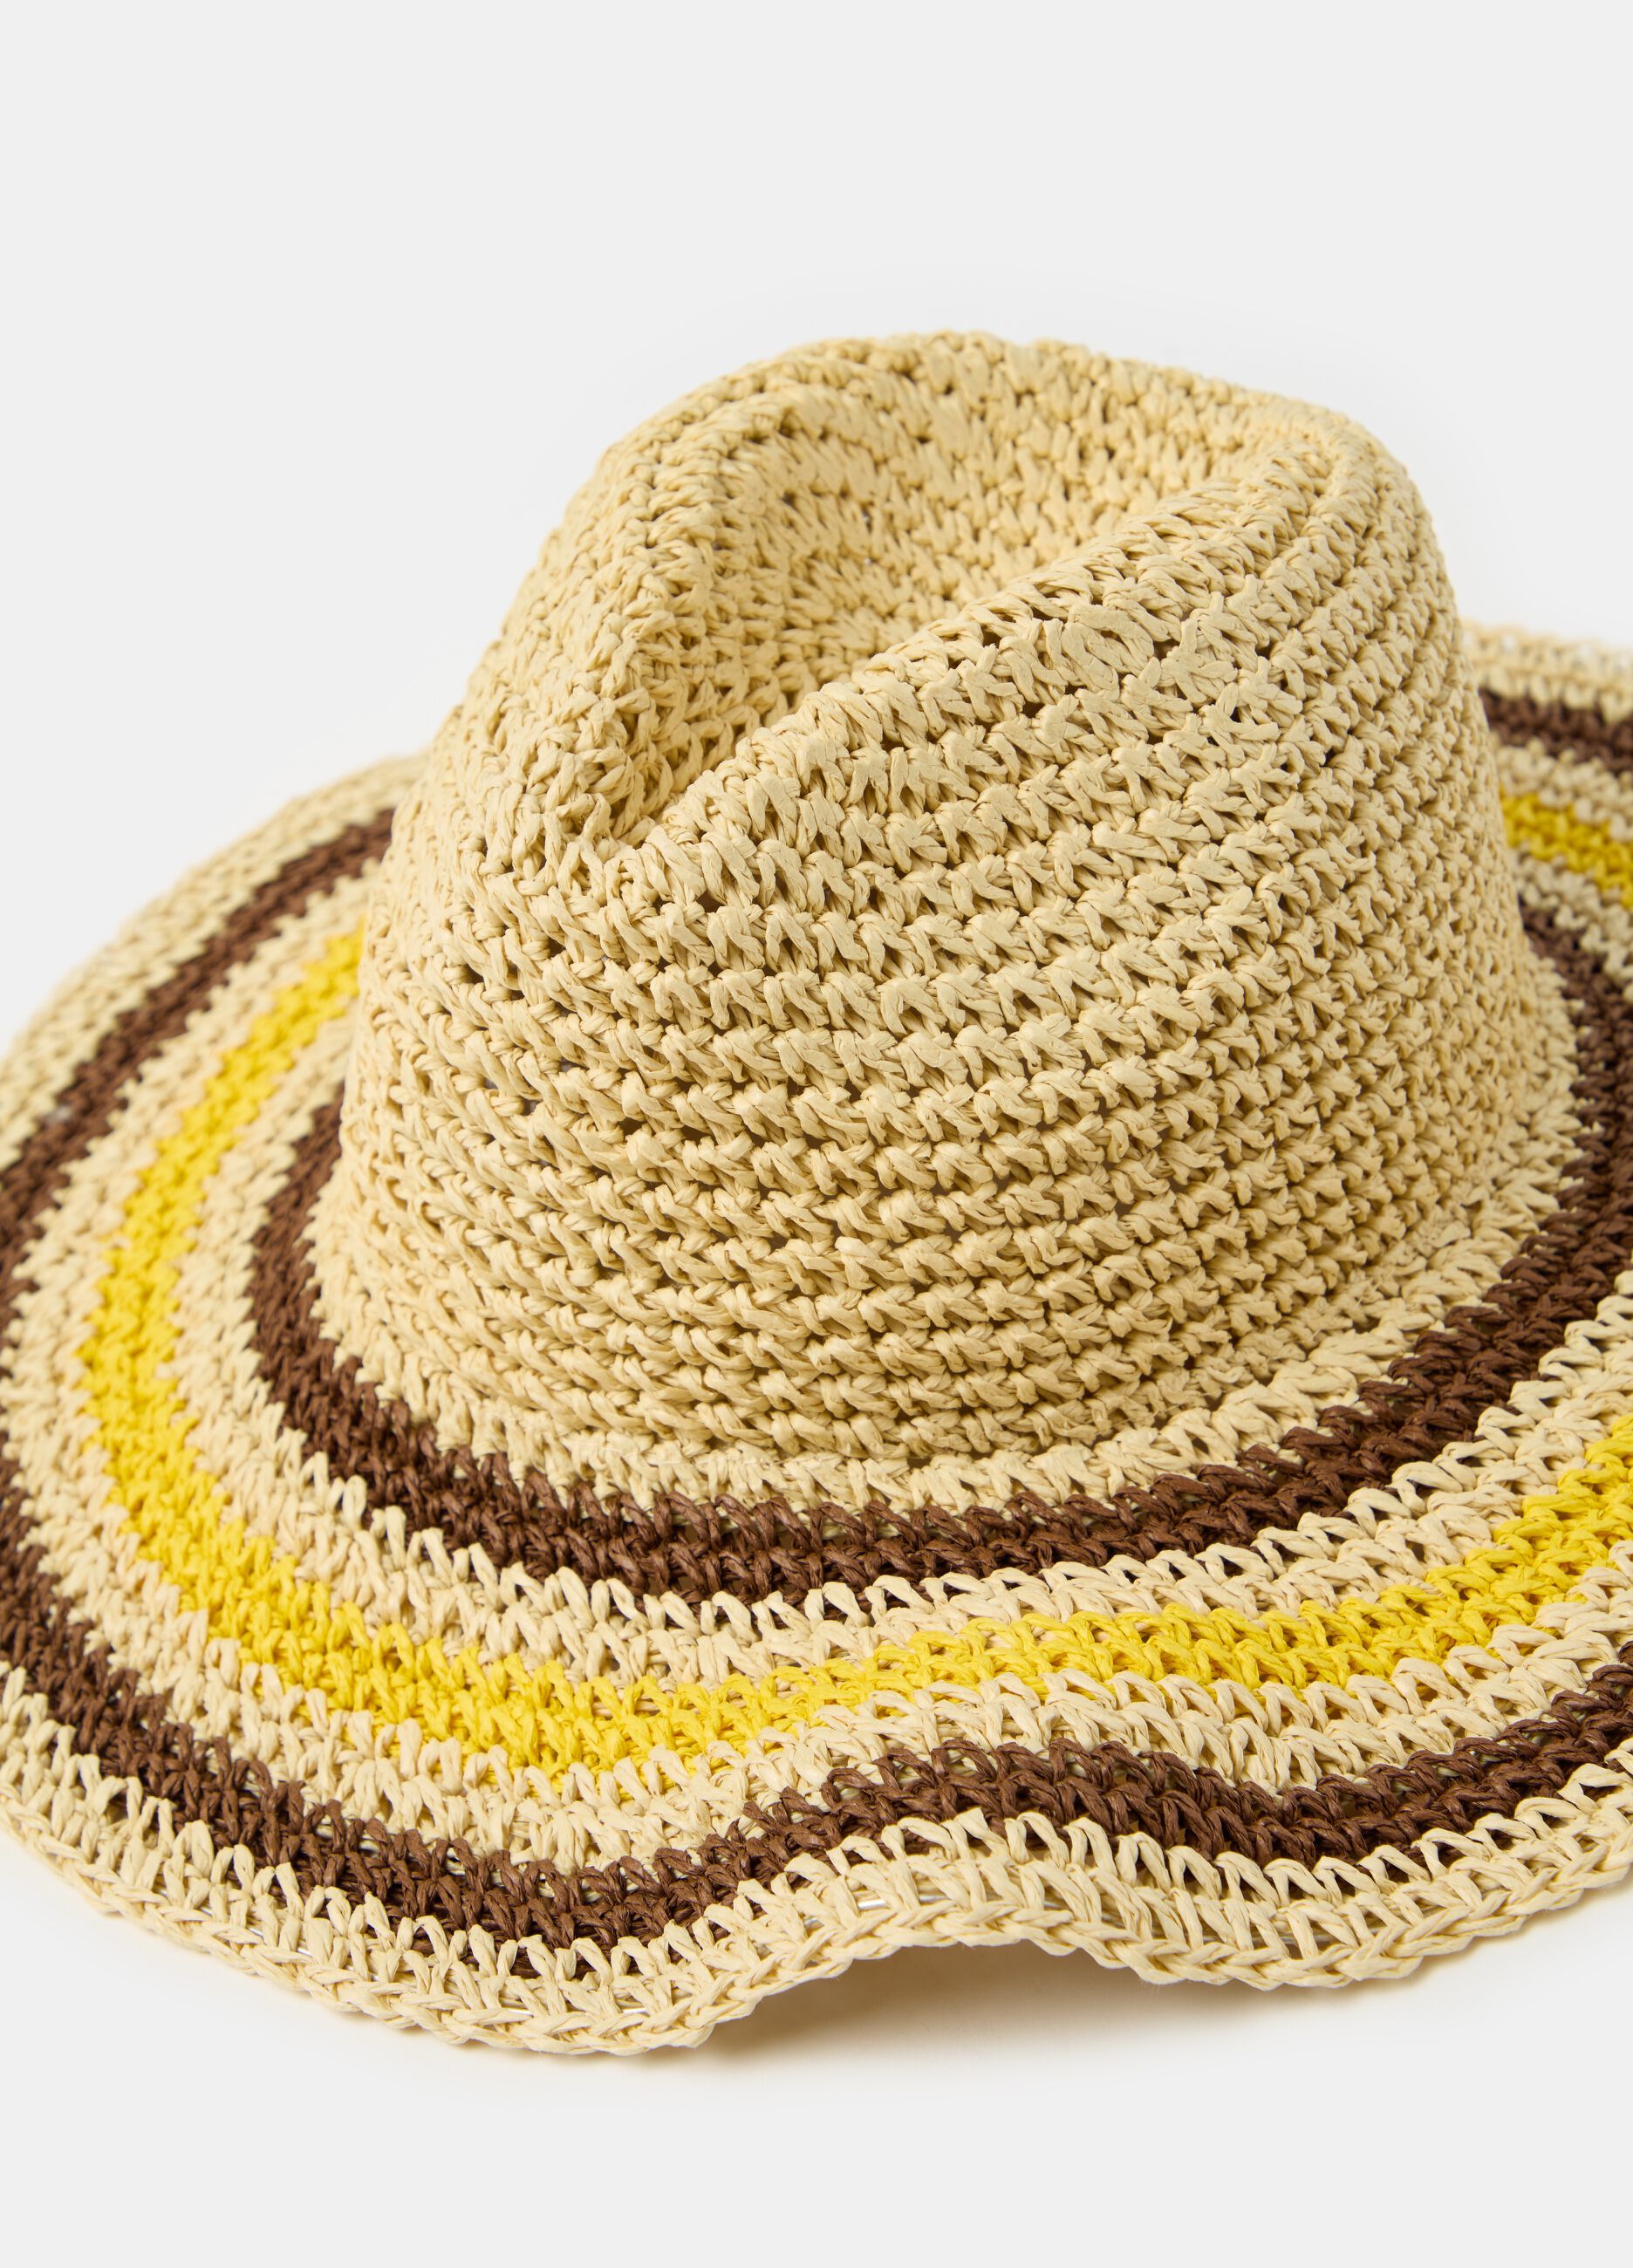 Straw hat with striped detail